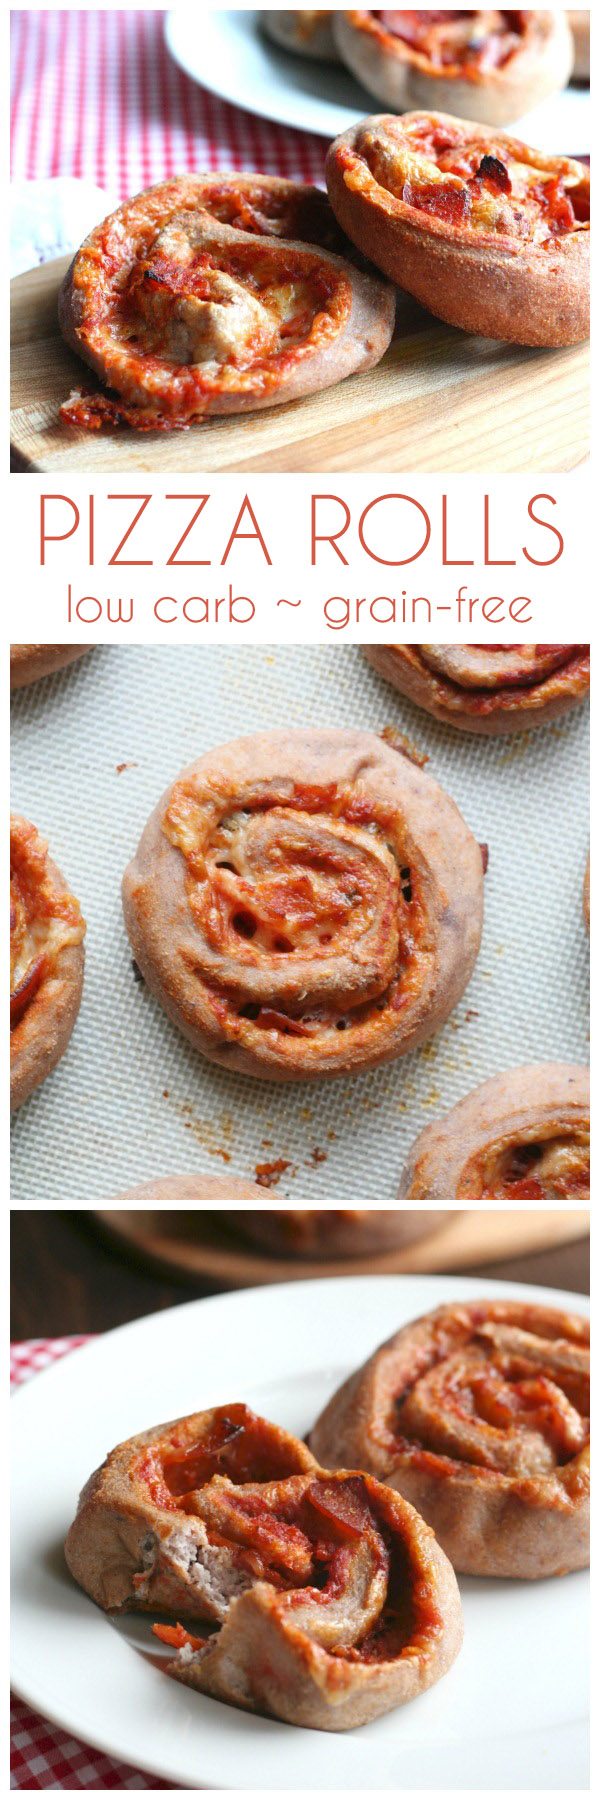 Low Carb Pizza Roll Recipe